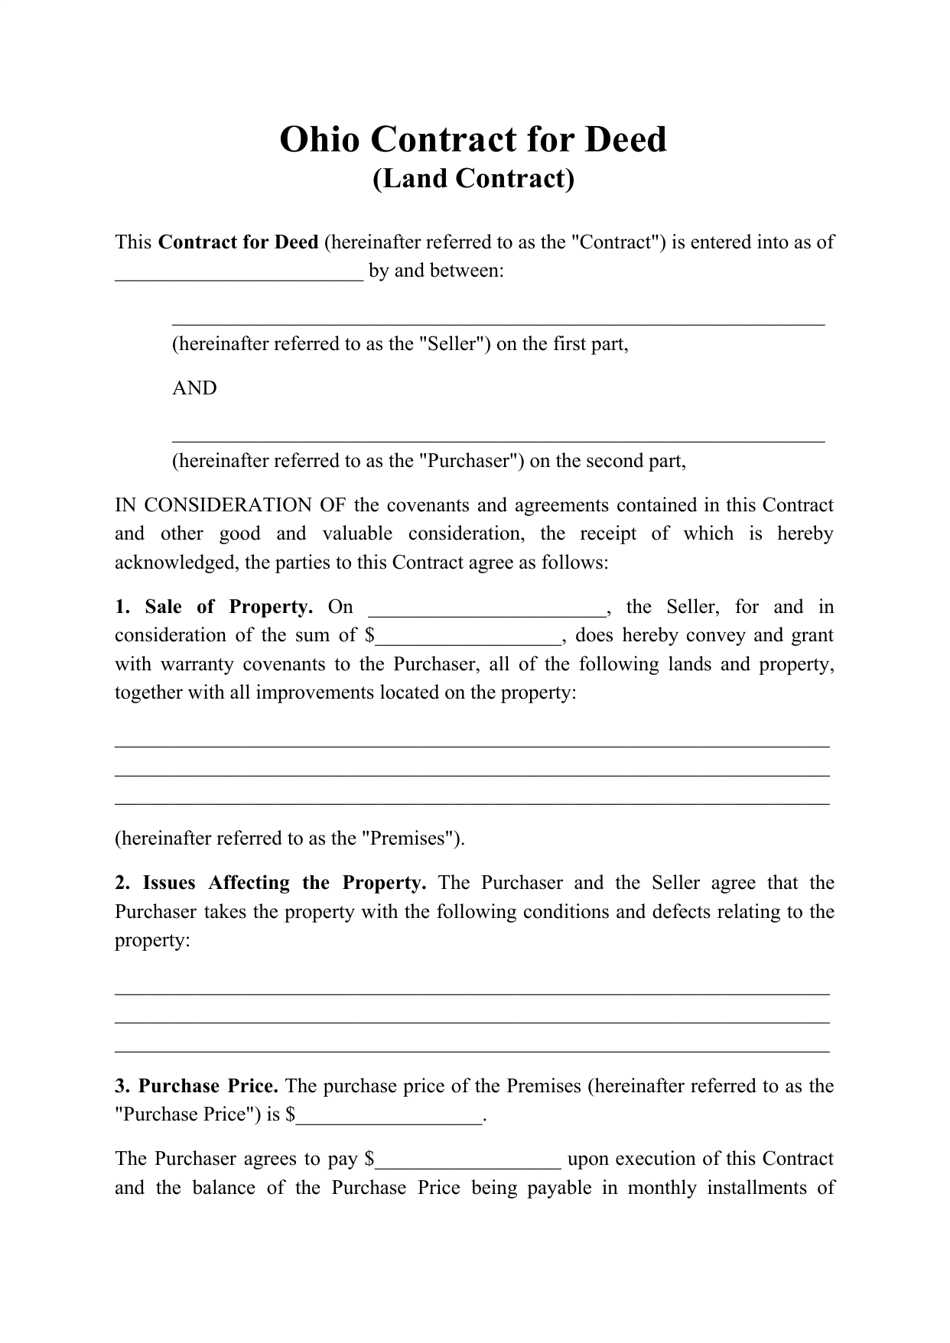 Contract for Deed (Land Contract) - Ohio, Page 1